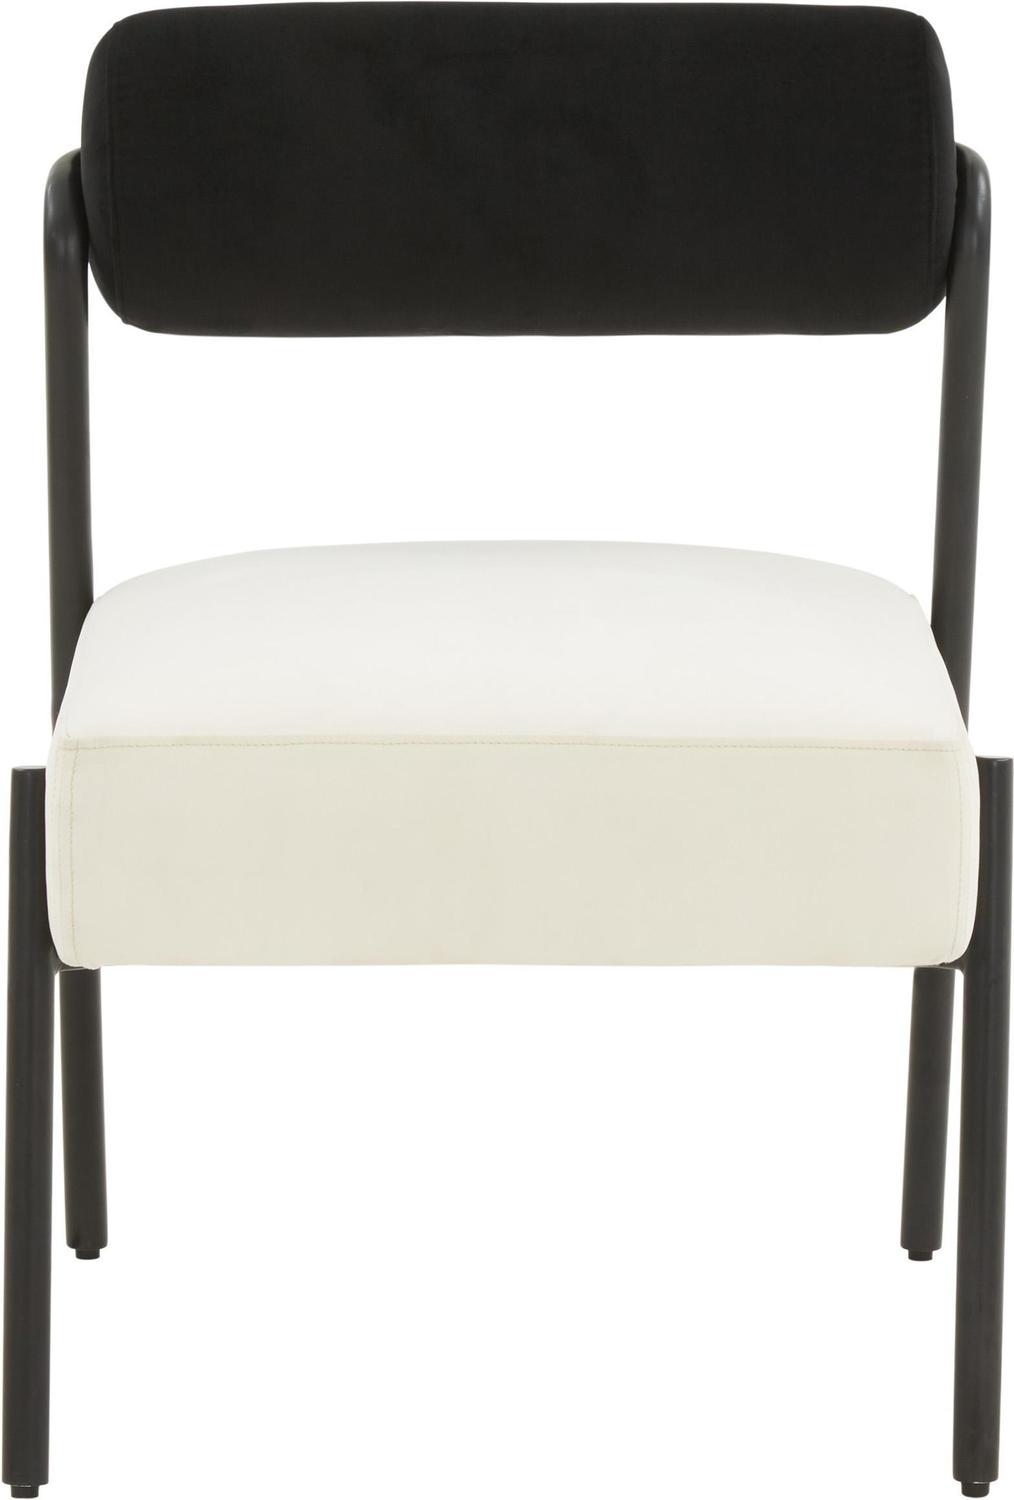 quality lounge chairs Tov Furniture Accent Chairs Black,Cream